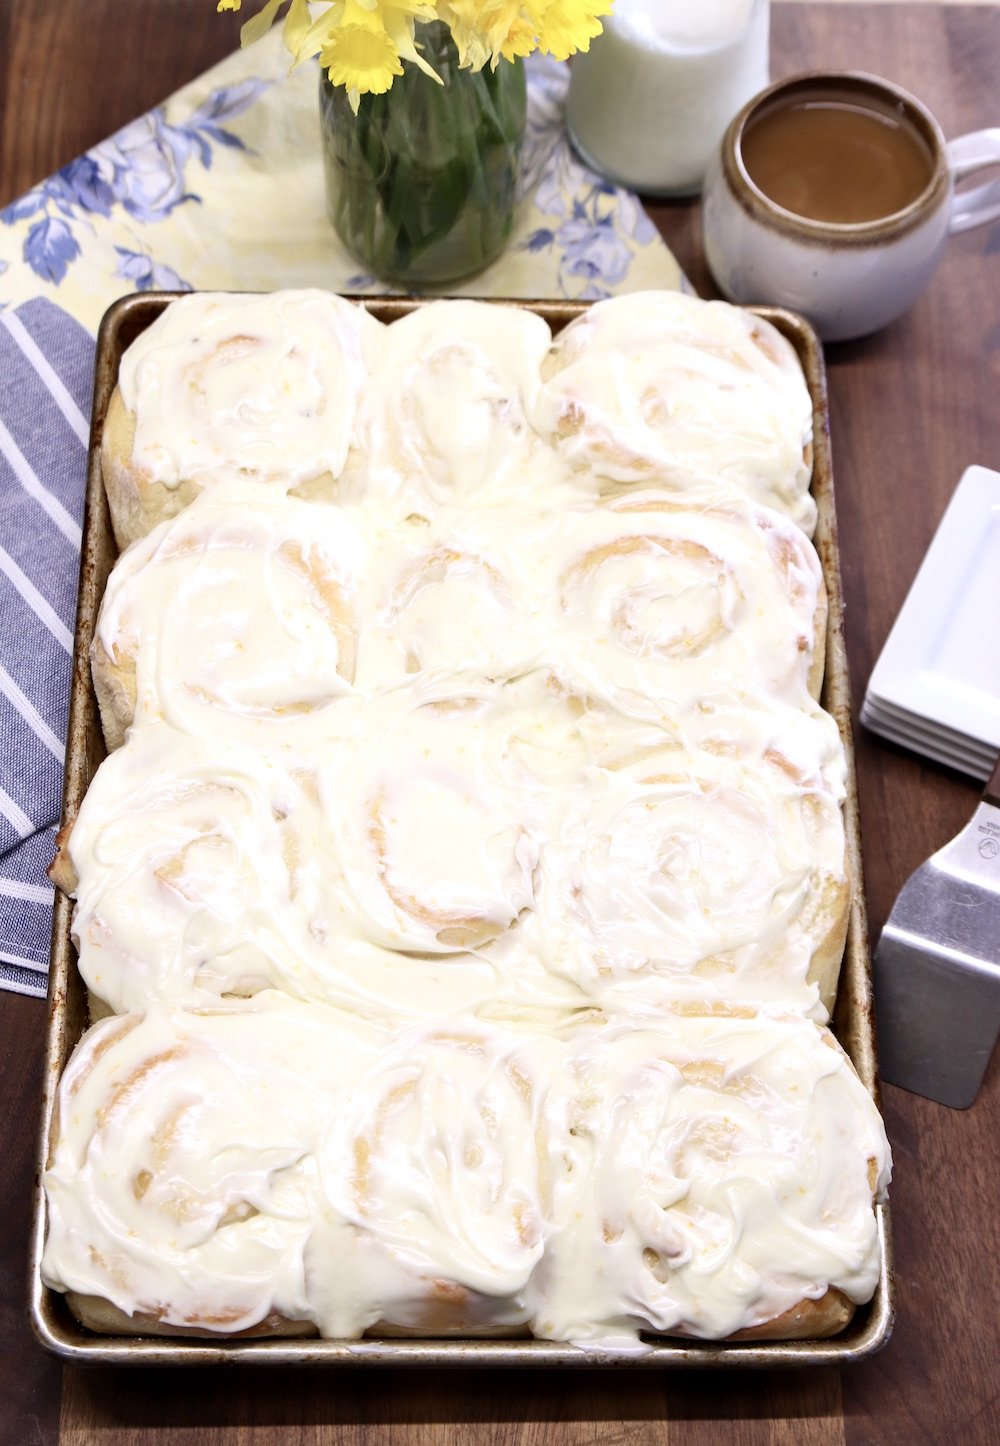 pan of cream cheese iced sweet rolls , flowers and coffee cup in background